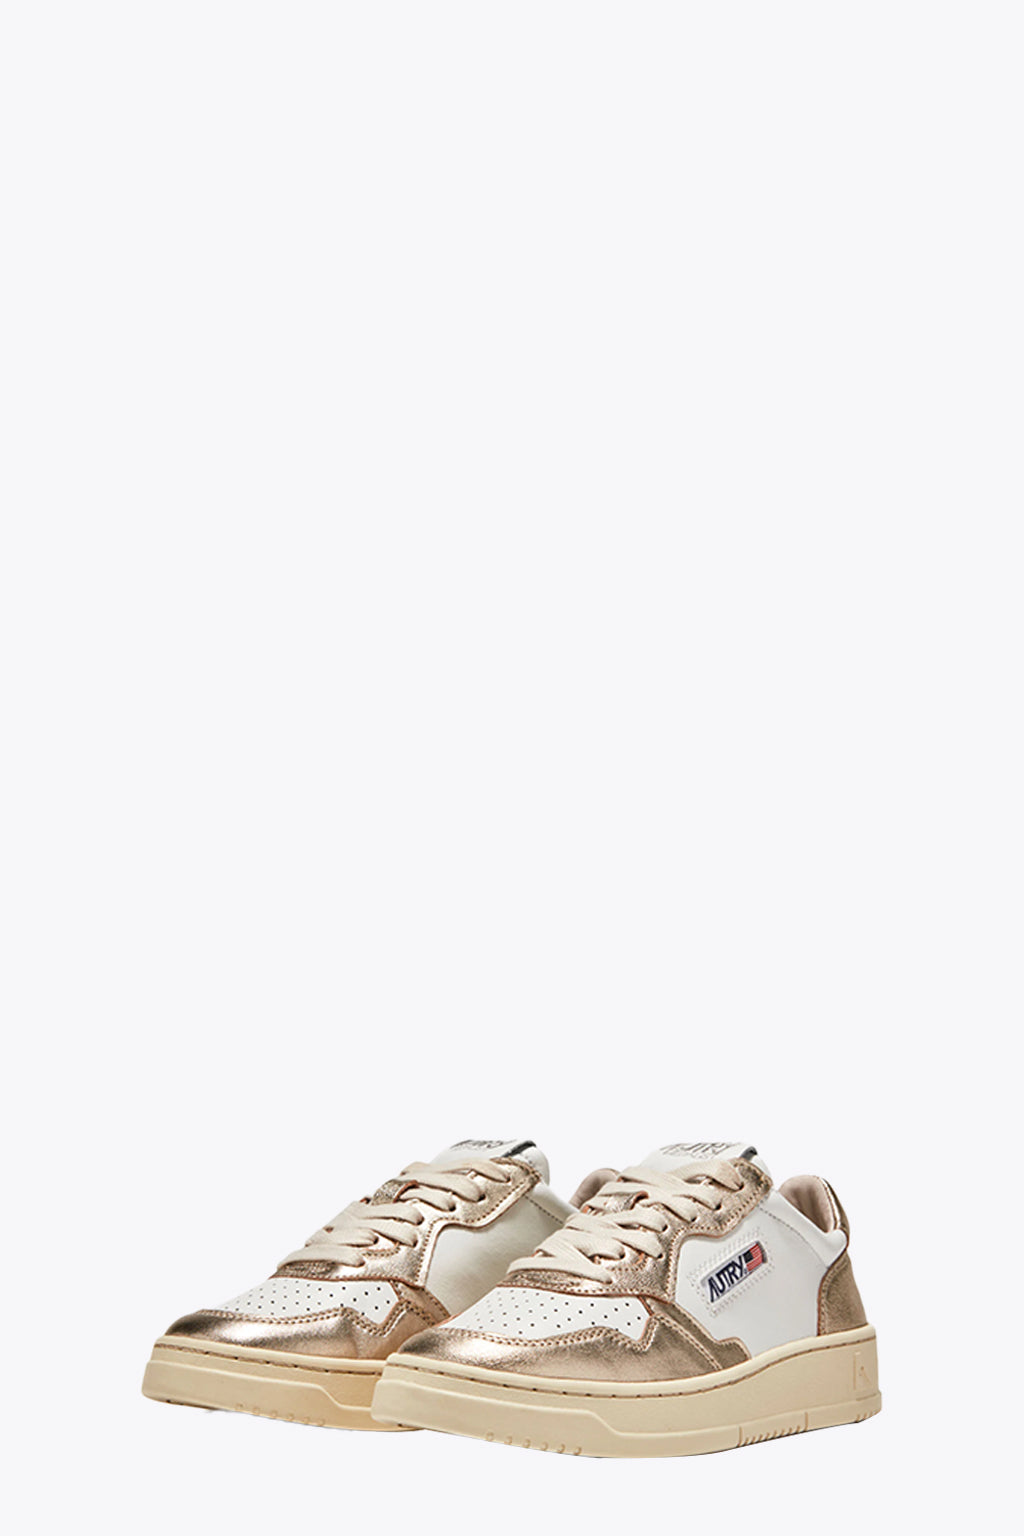 alt-image__Gold-and-white-leather-low-sneaker---Medalist